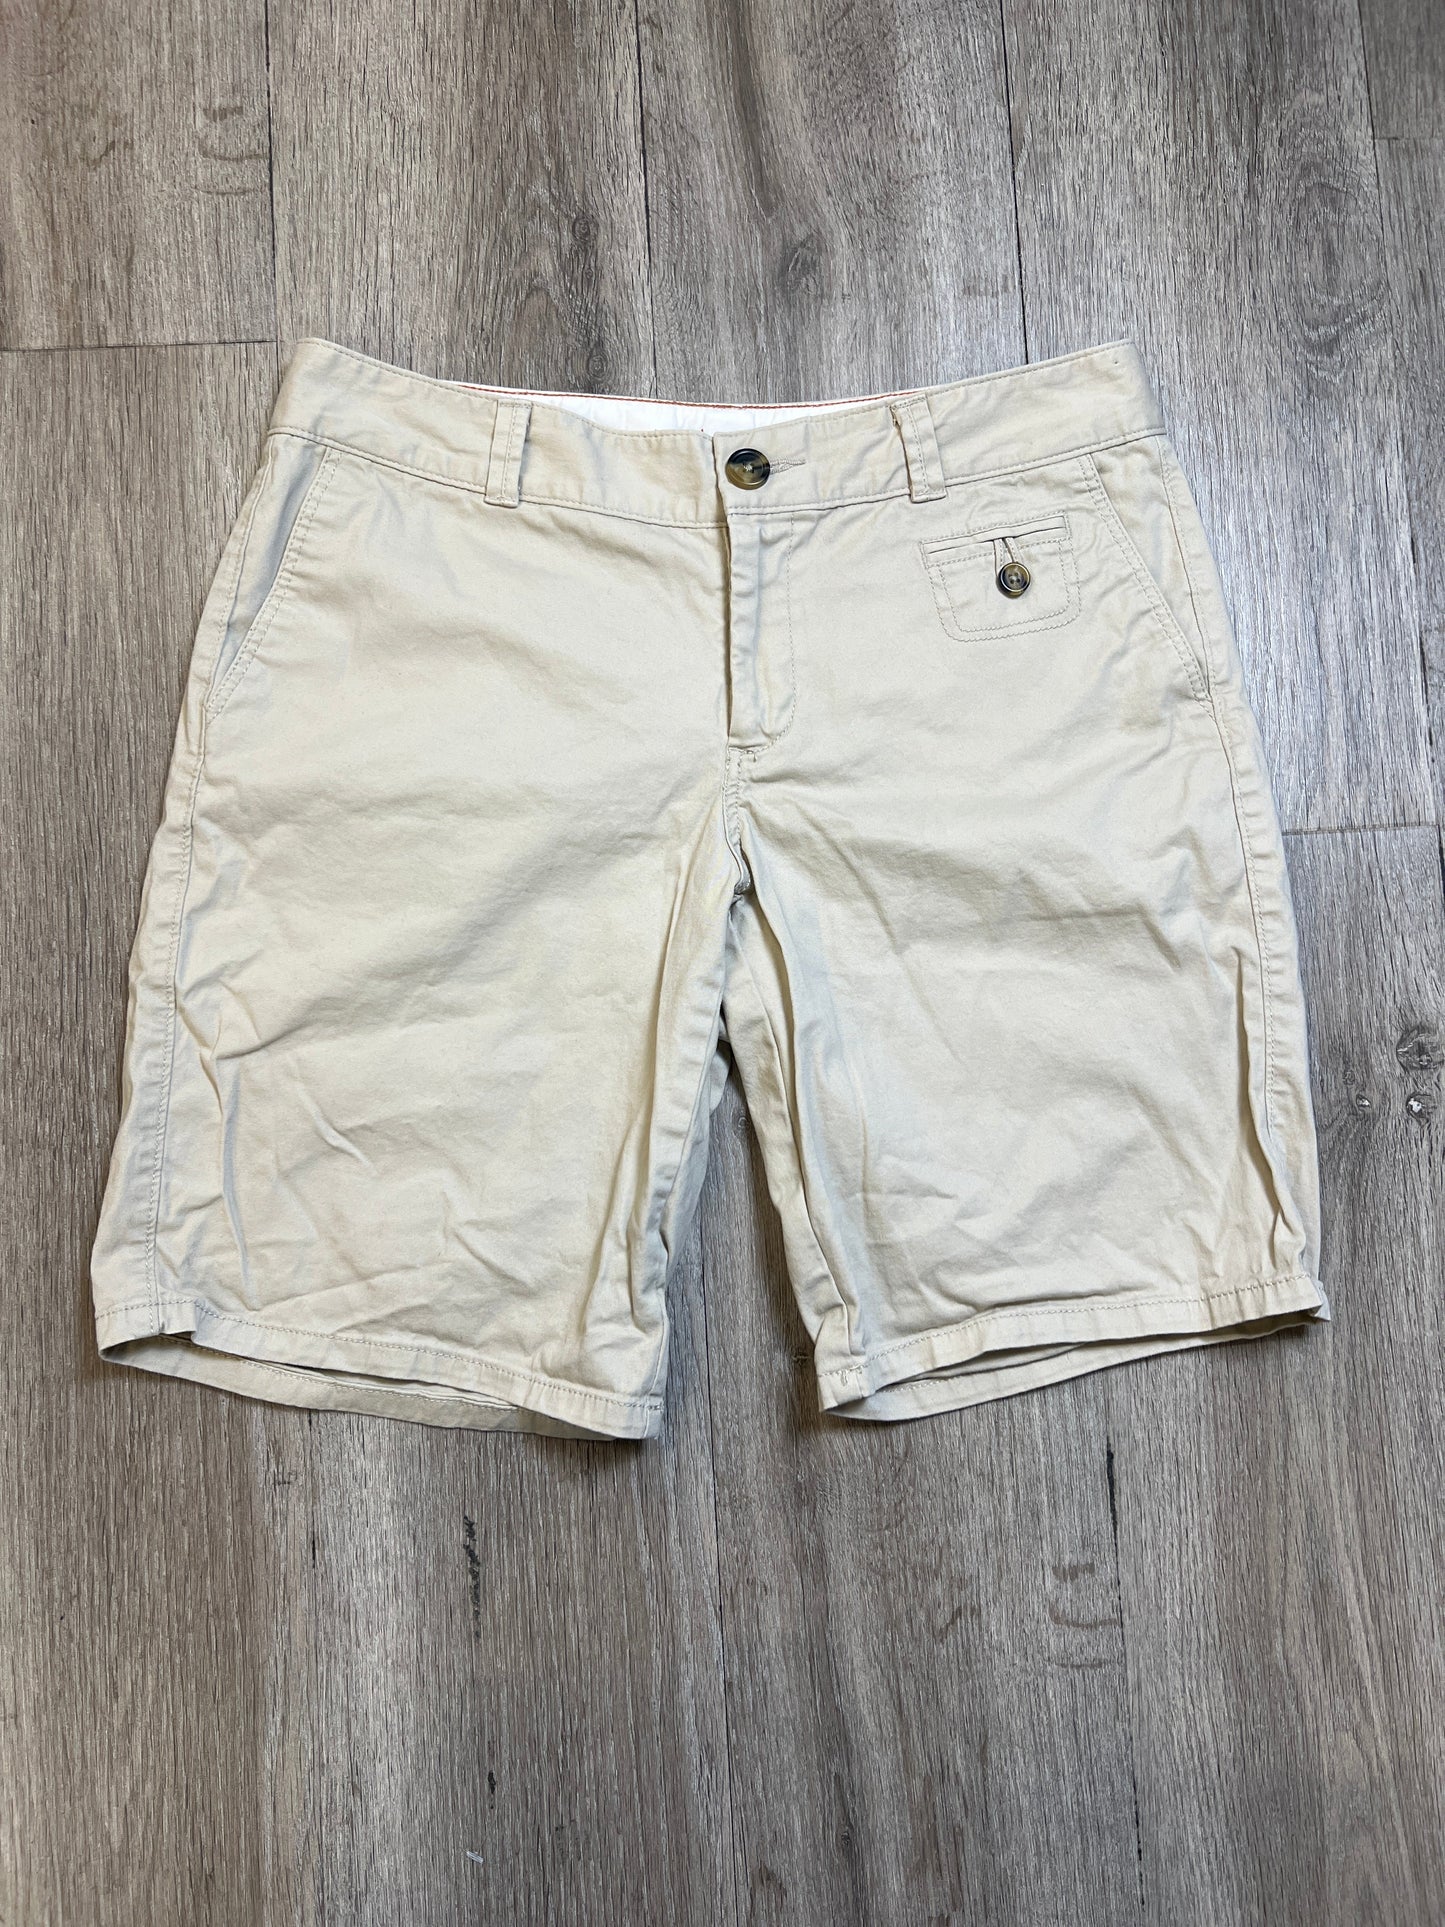 Shorts By Dockers  Size: M